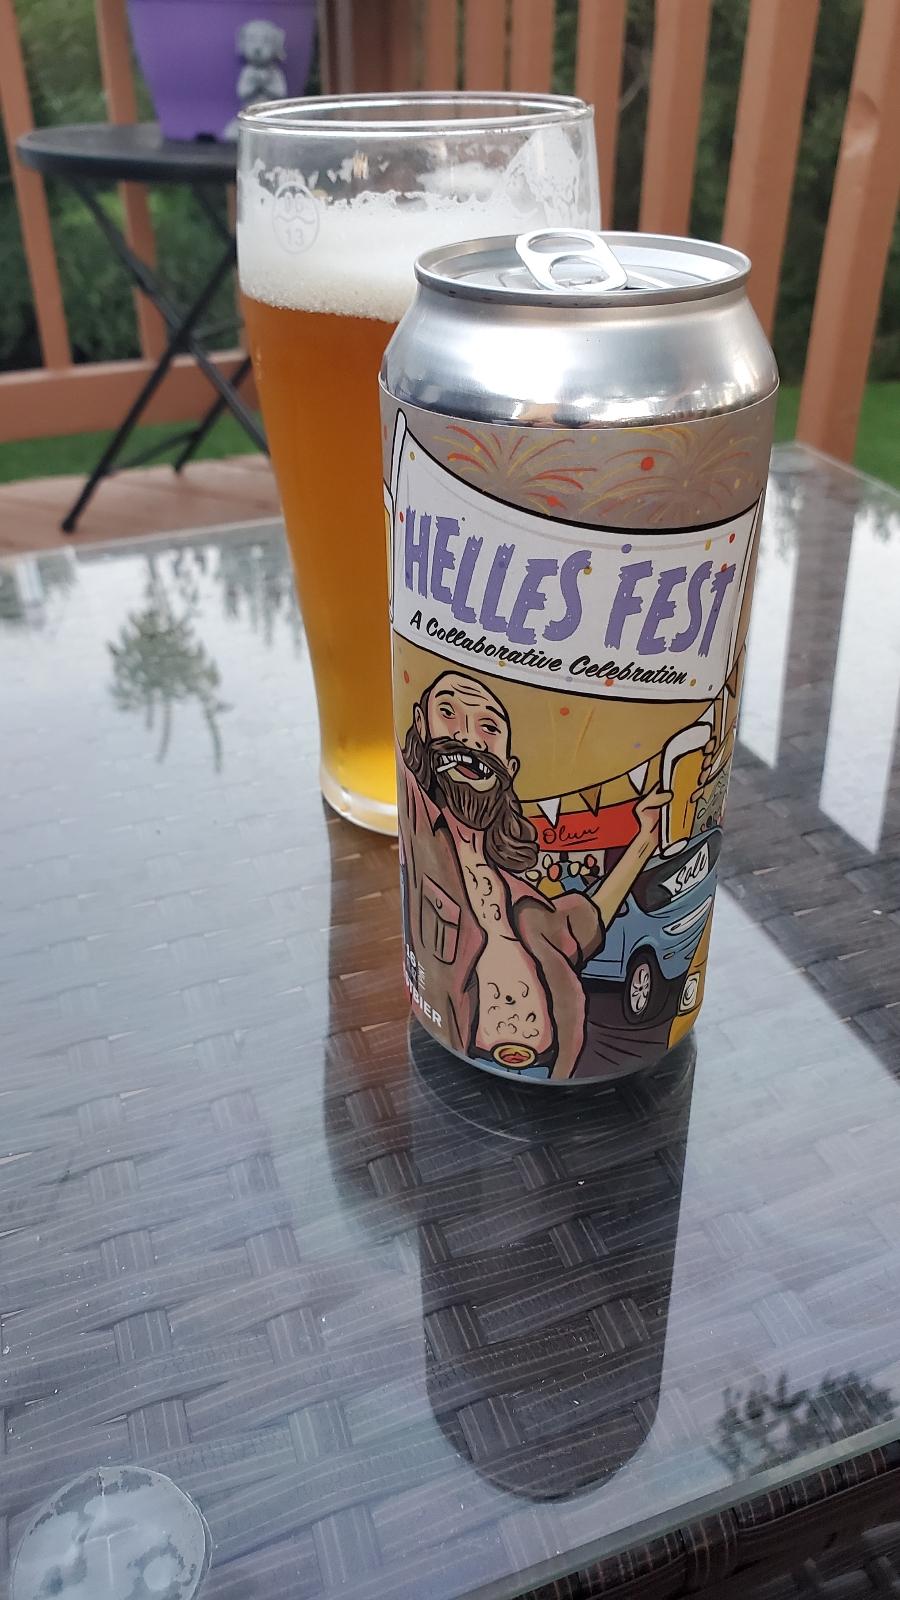 Helles Fest (Collaboration with Dewey Beer)